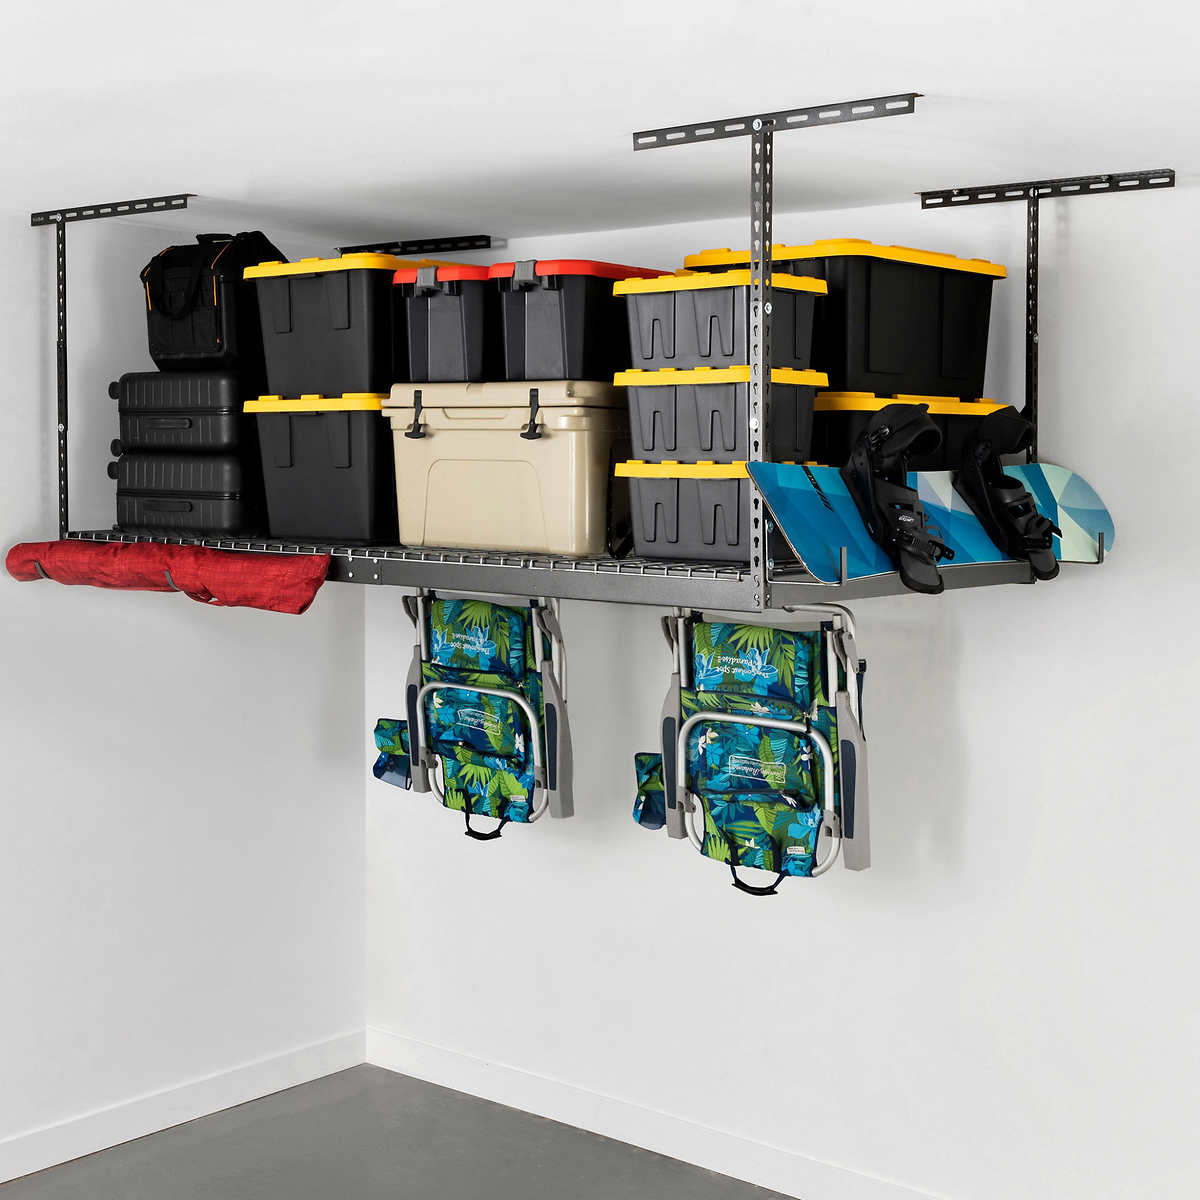 SafeRacks 4 ft. x 8 ft. Overhead Garage Storage Rack and Accessories Kit Costco $149.99